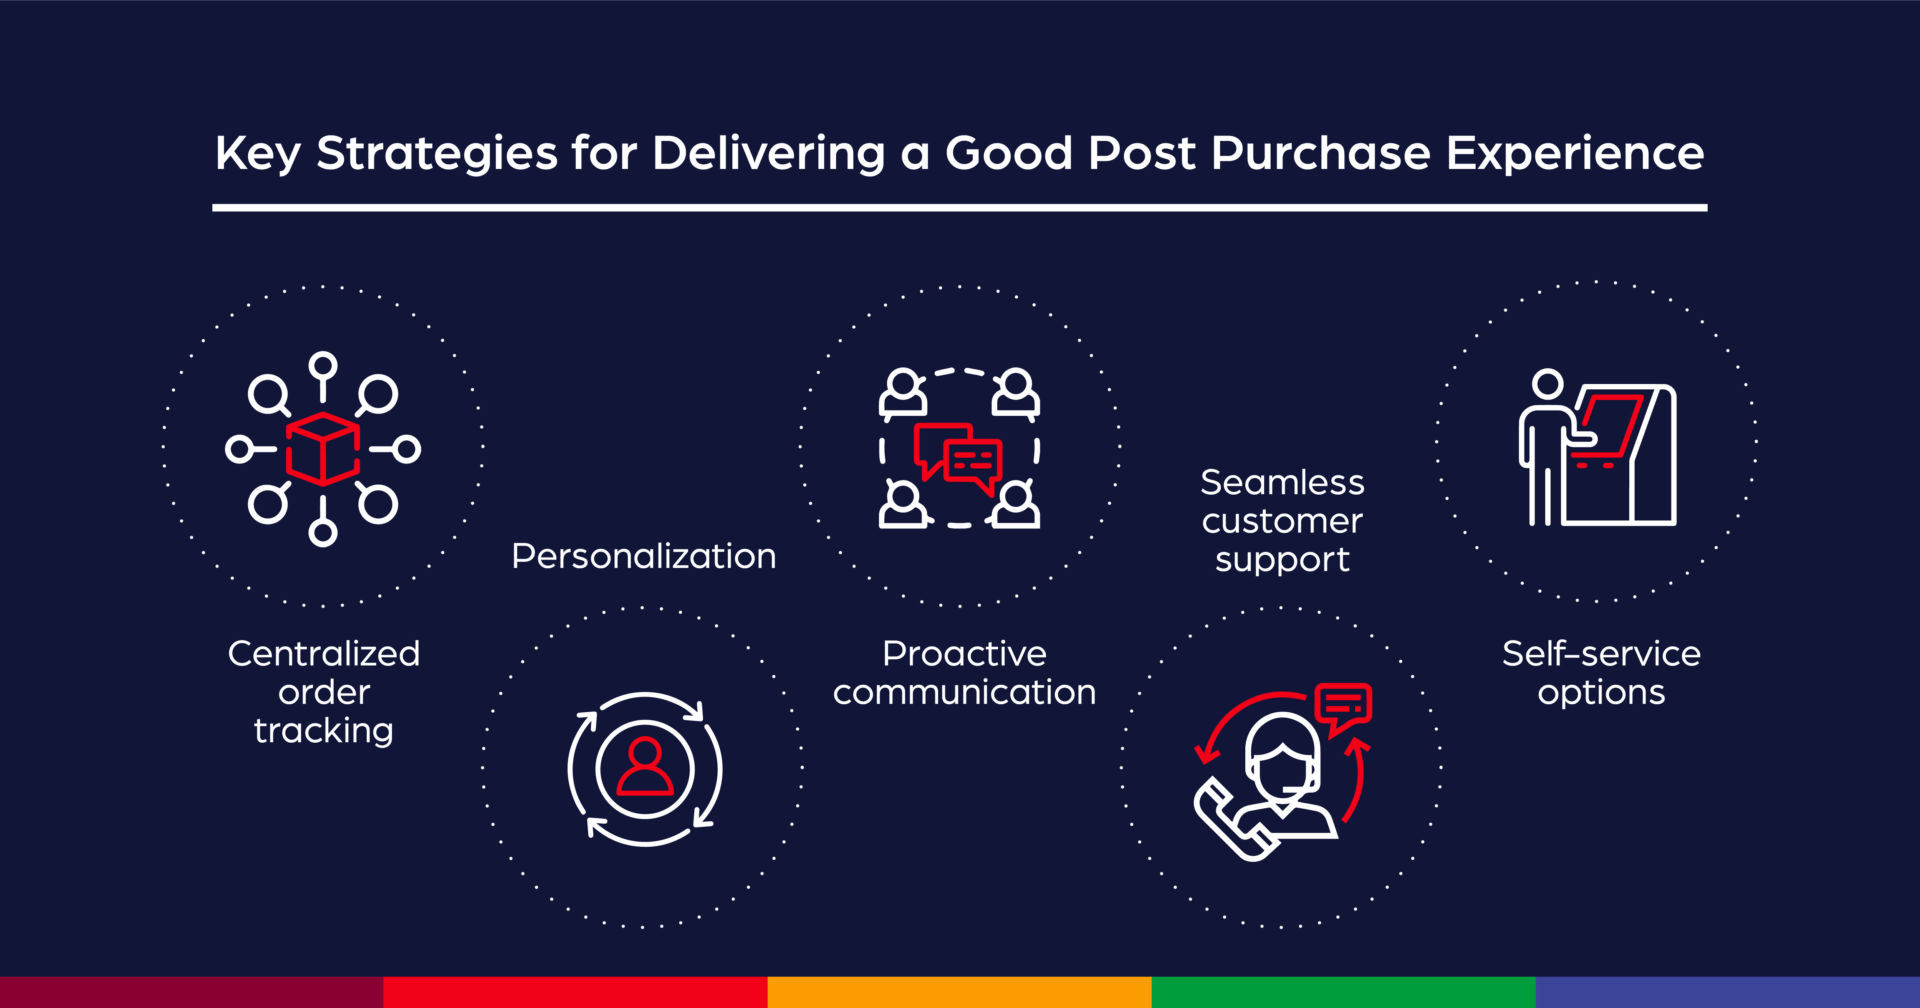 Key Strategies for Delivering a Good Post Purchase Experience